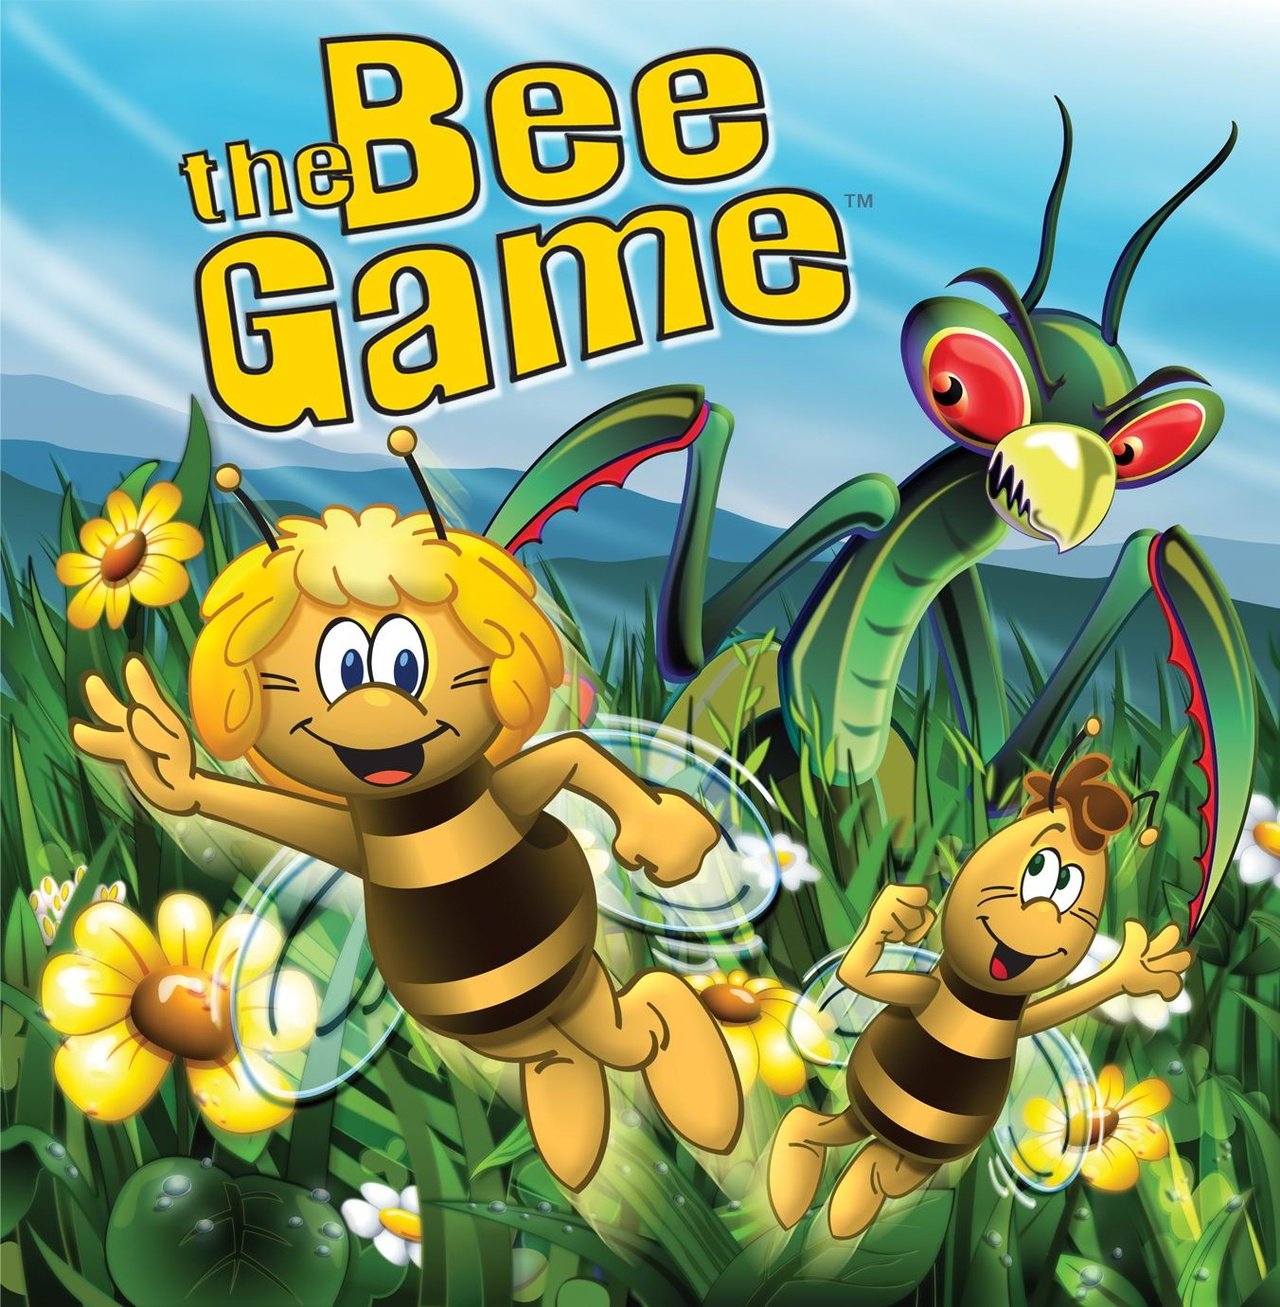 Image of The Bee Game